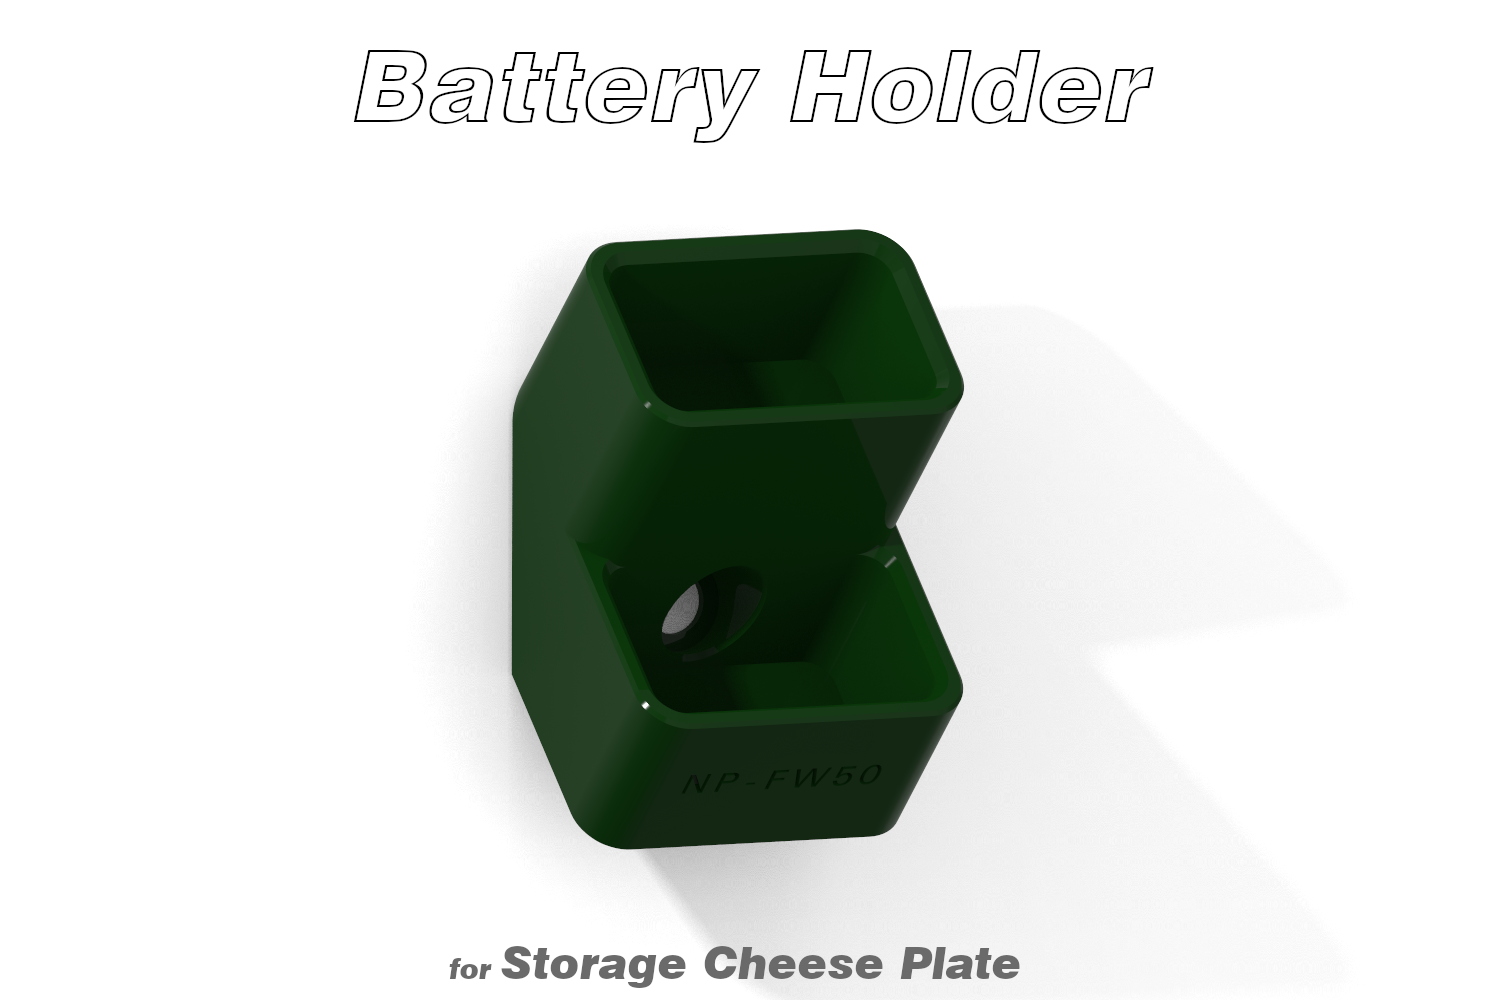 NP-FW50 Battery Holder (for Storage Cheese Plate)